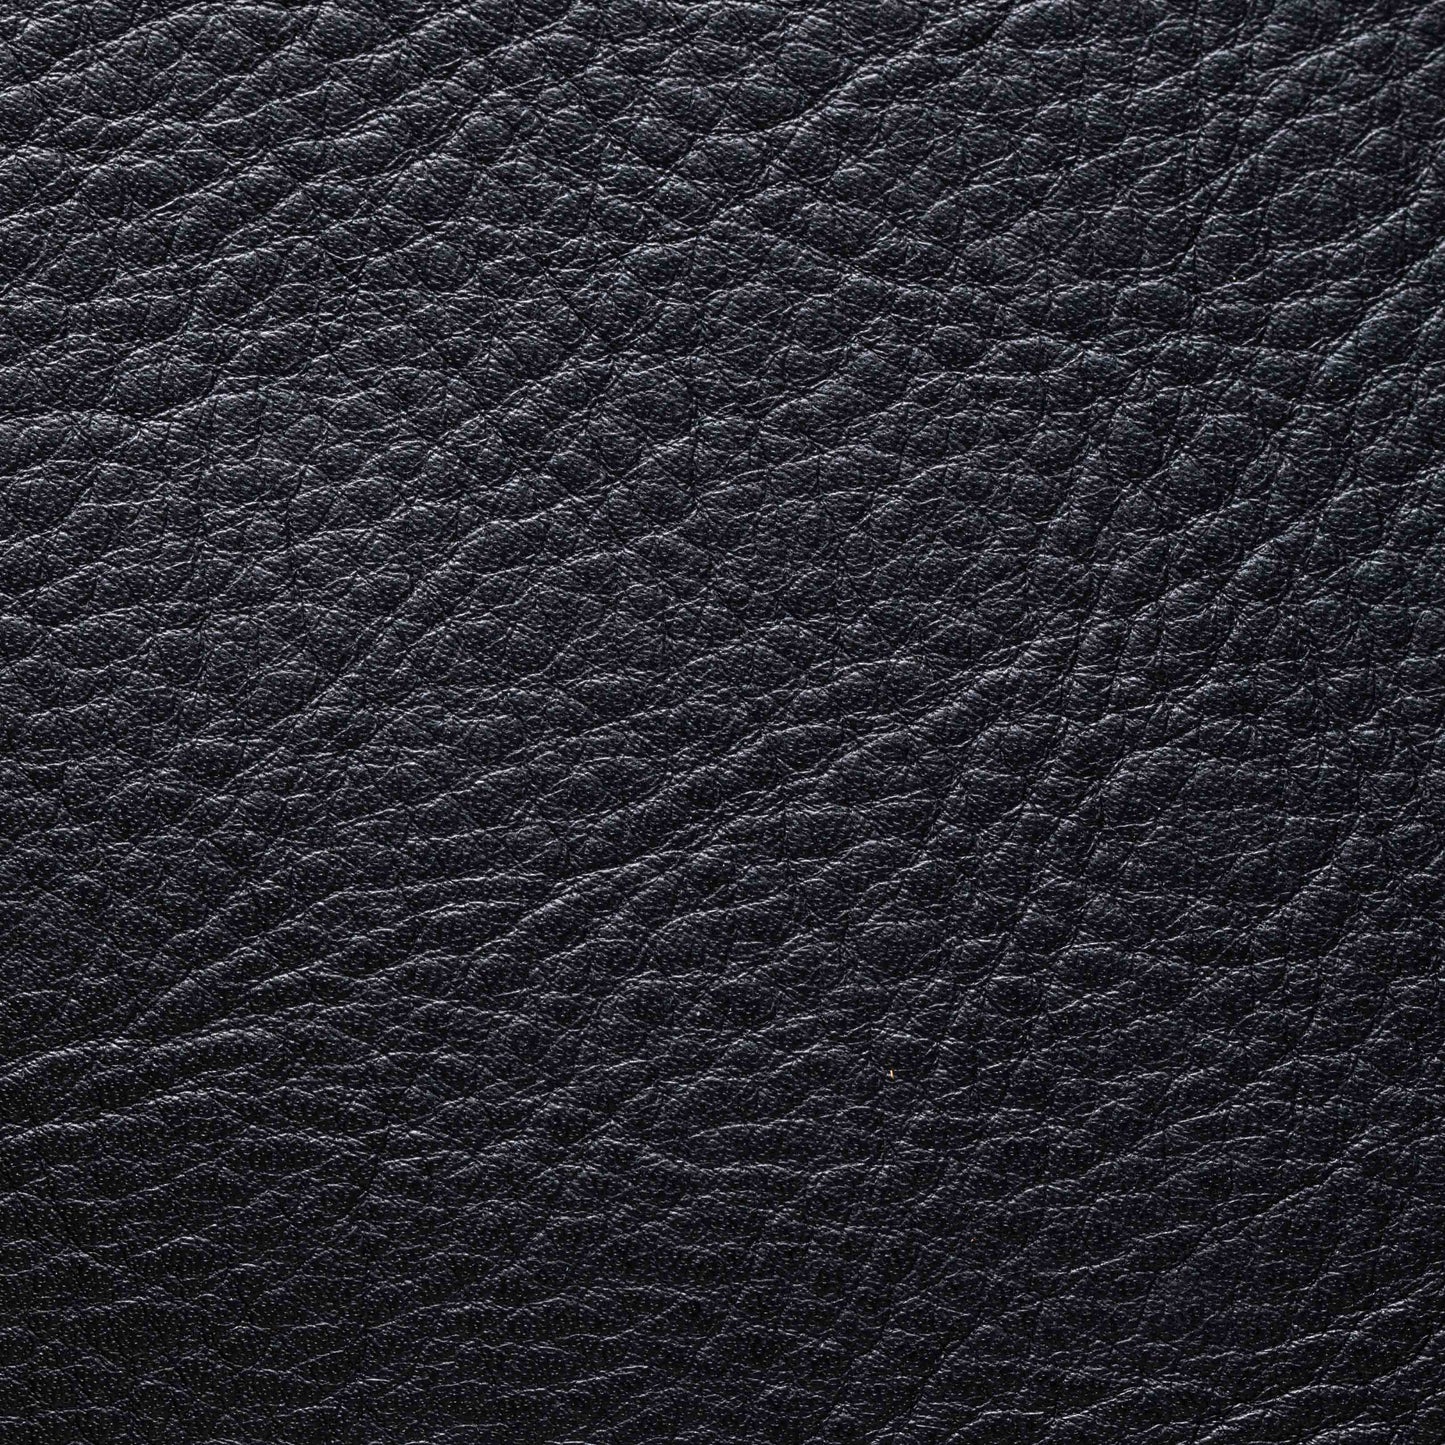 Premium Leather Collection – Explore our exclusive range of Cow, Kudu, and Oryx Genuine Full Grain Leathers. We keep it real with the finest materials, offering a touch of luxury and authenticity for your furniture.